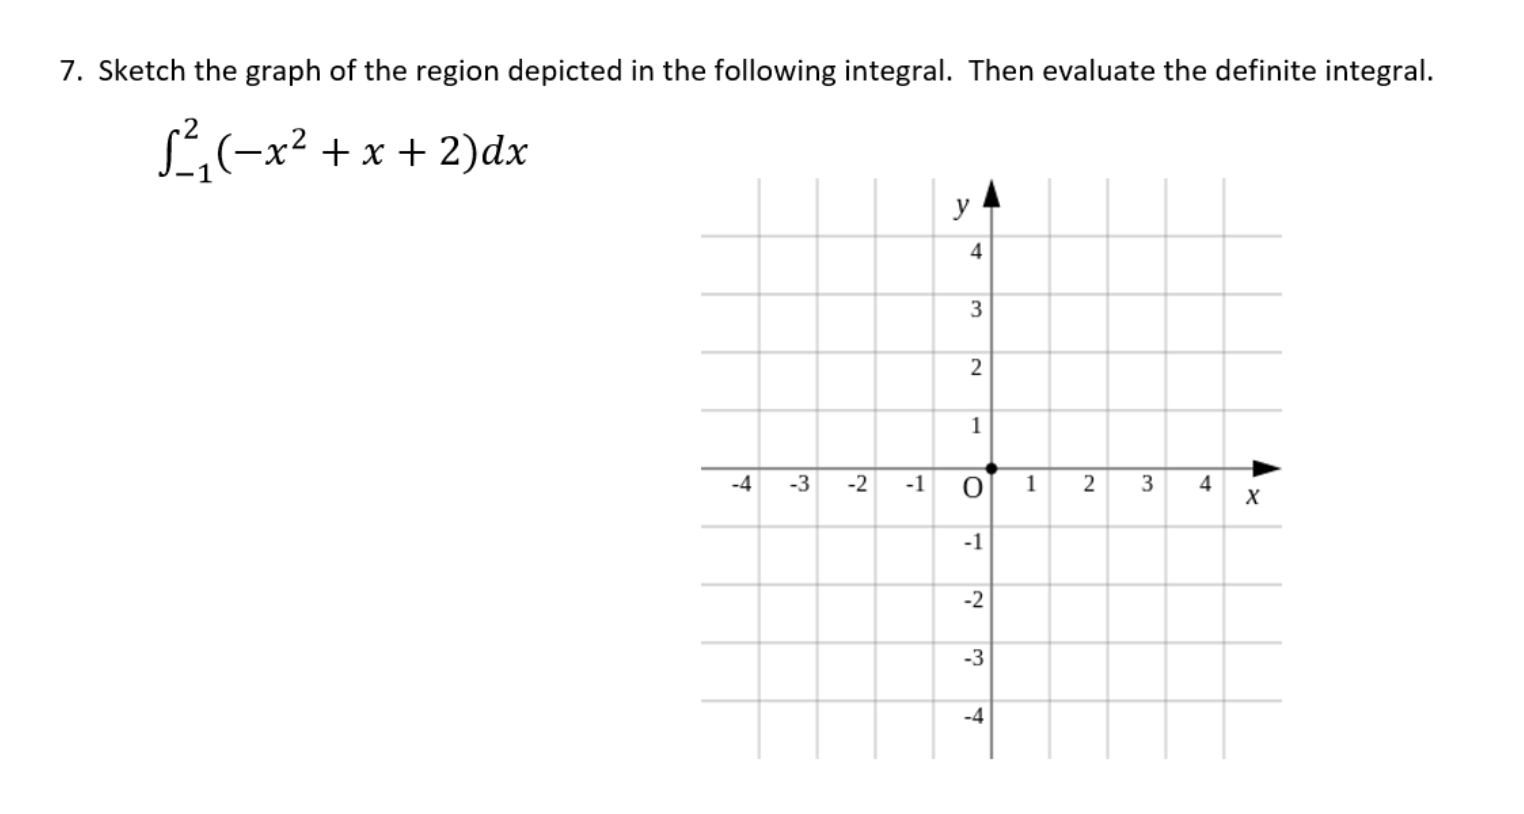 Sketch the graph of the region depicted in the following integral. Then evaluate the definite integral.
L(-x² + x + 2)dx
